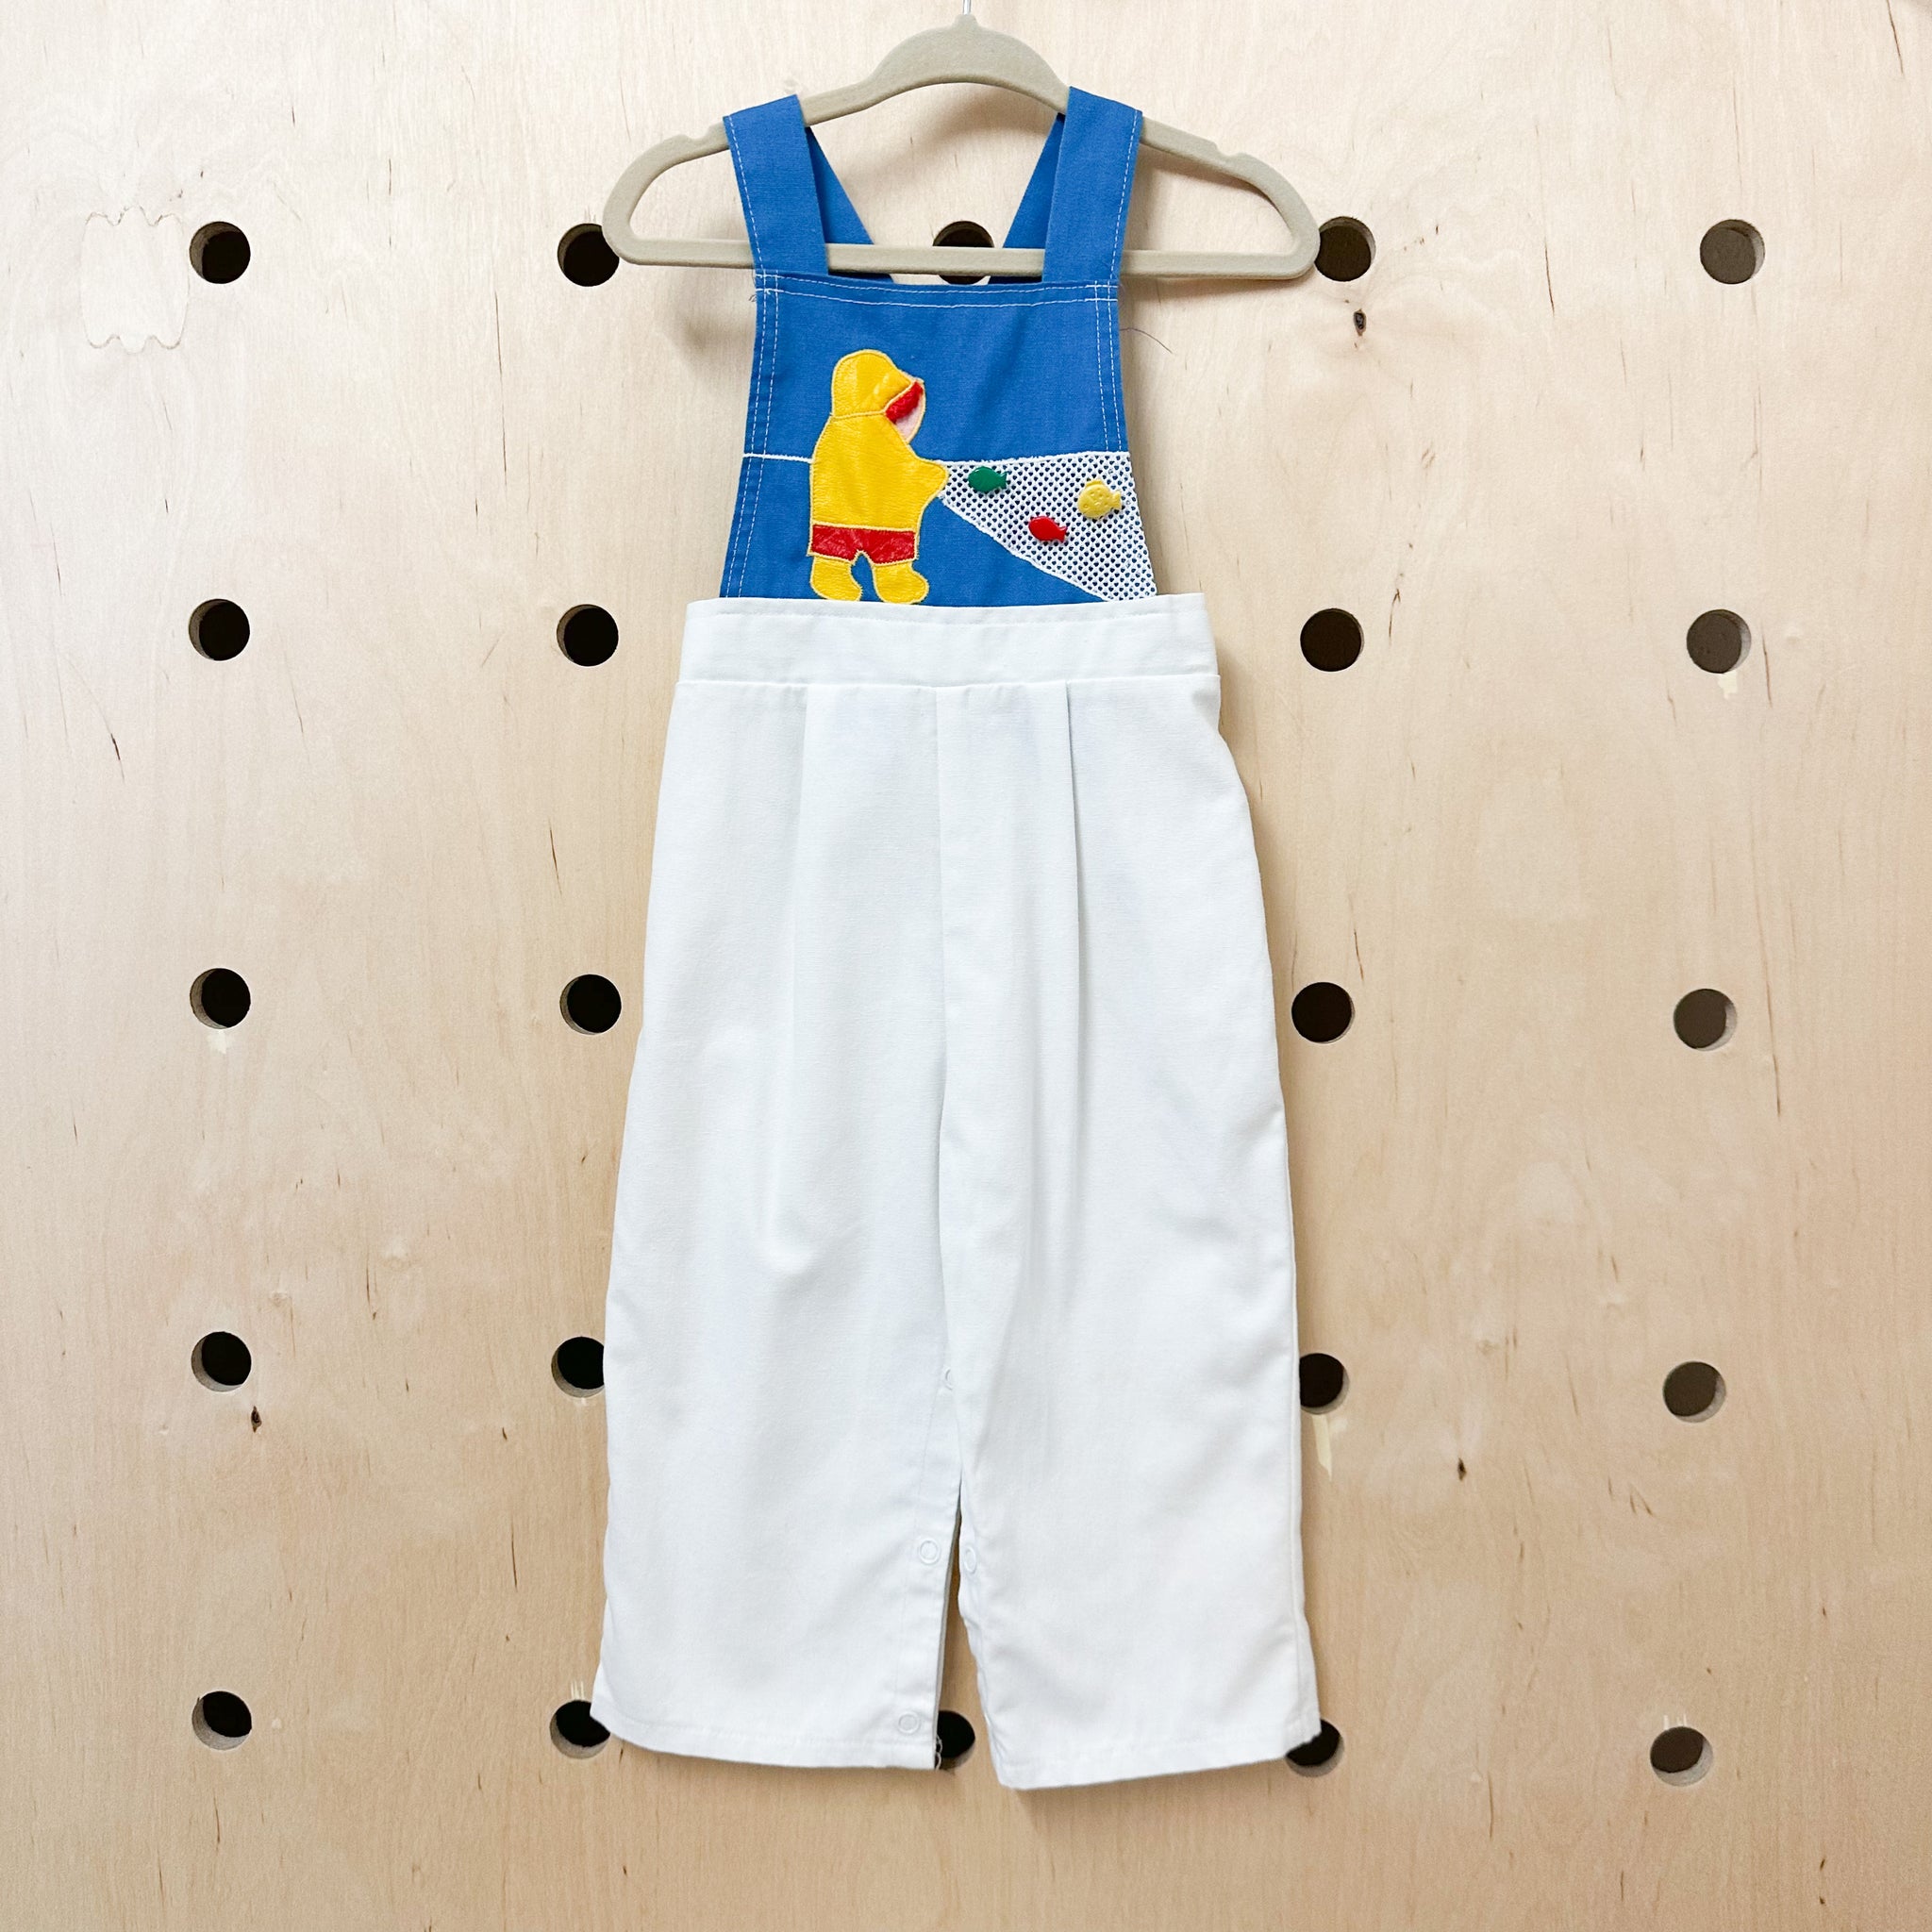 Vintage 1970s Fishing Novelty Overalls